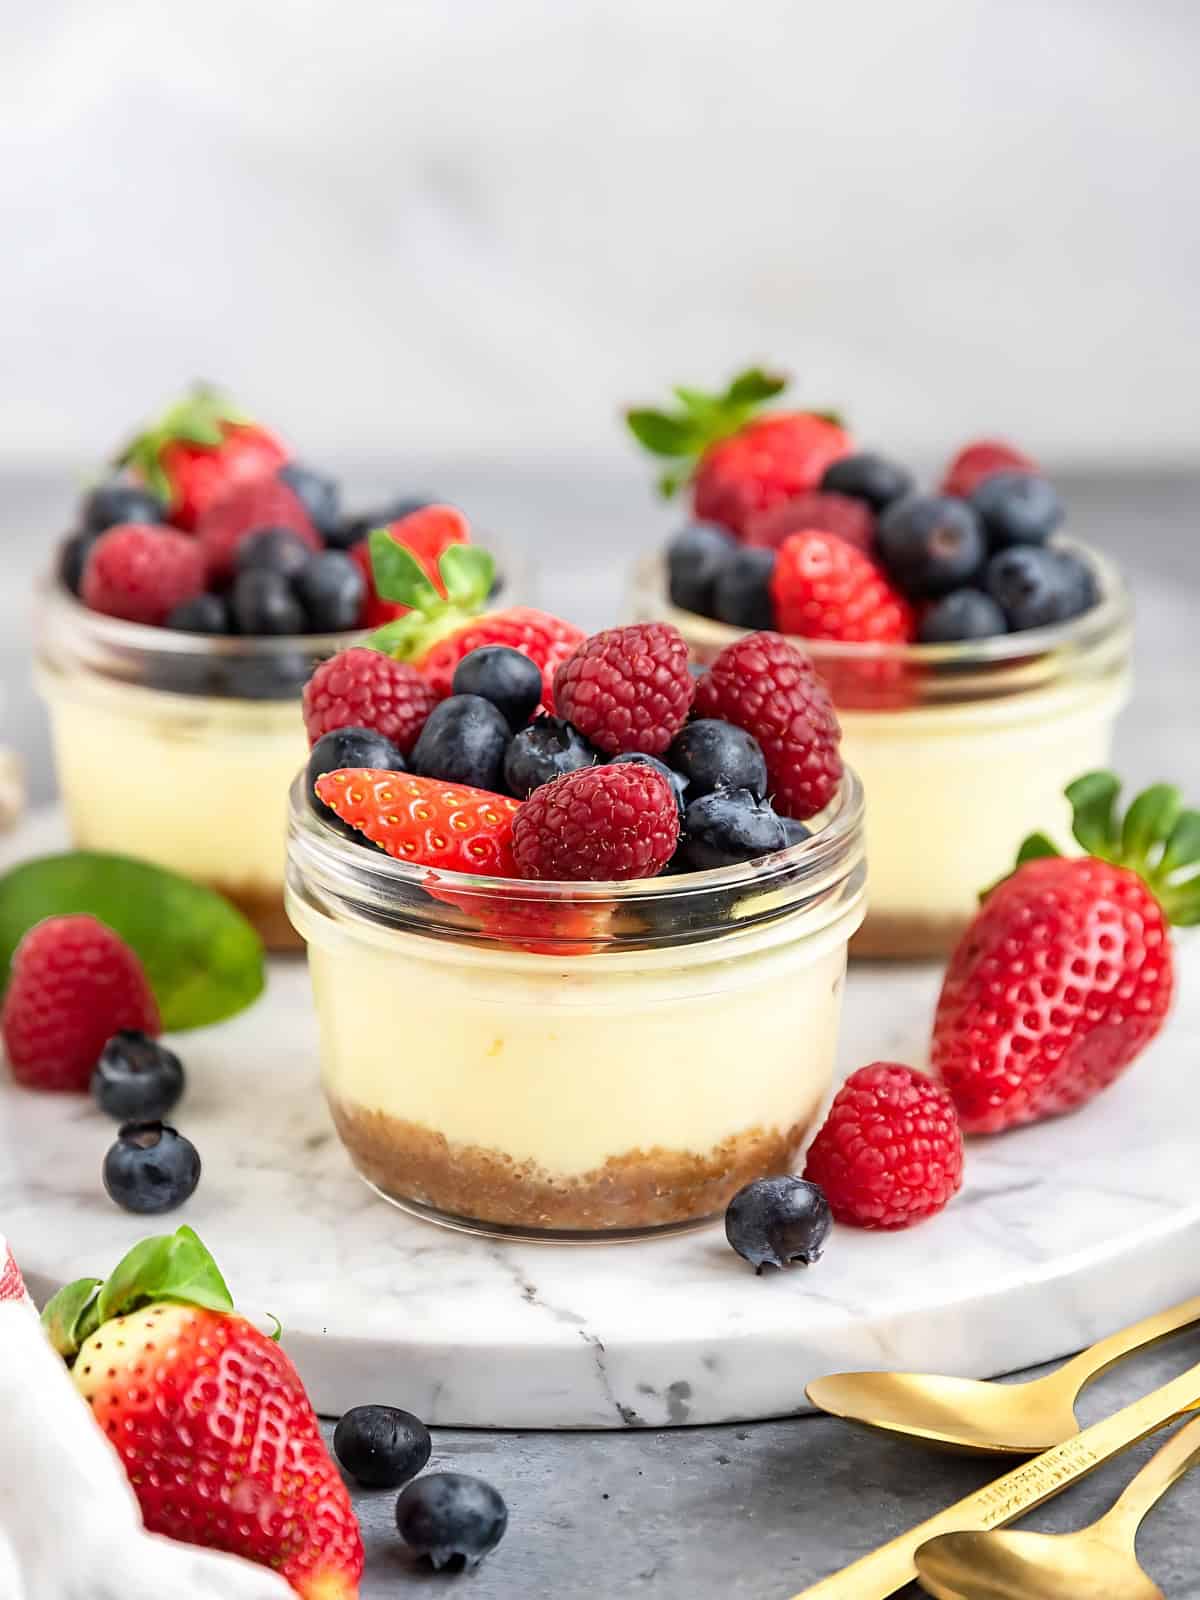 Pot mini cheese cakes in a small glass cup topped with strawberries, blueberries, and raspberries.